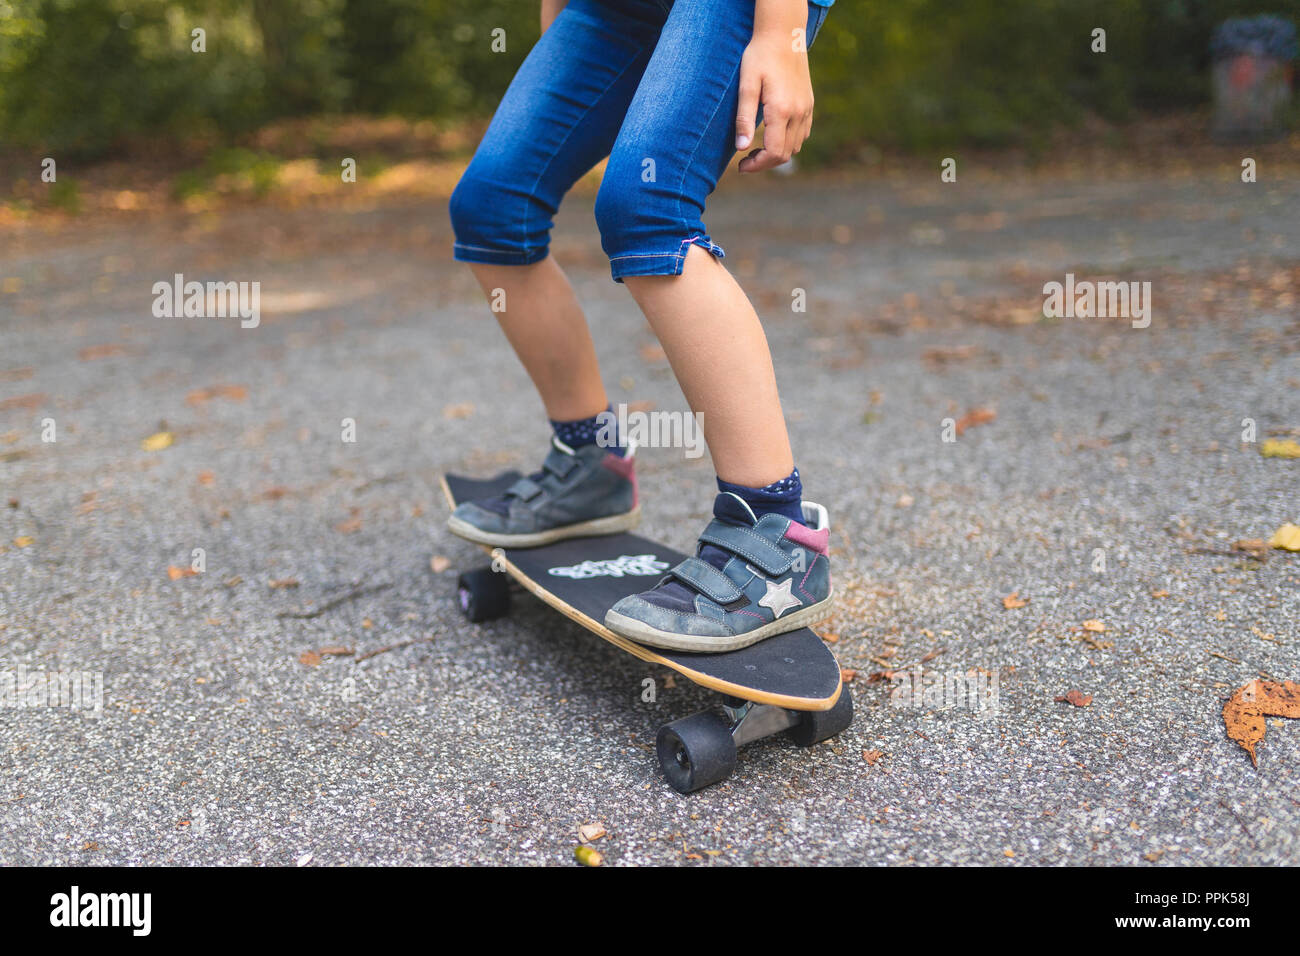 A child is skating on a longboard, close-up Stock Photo